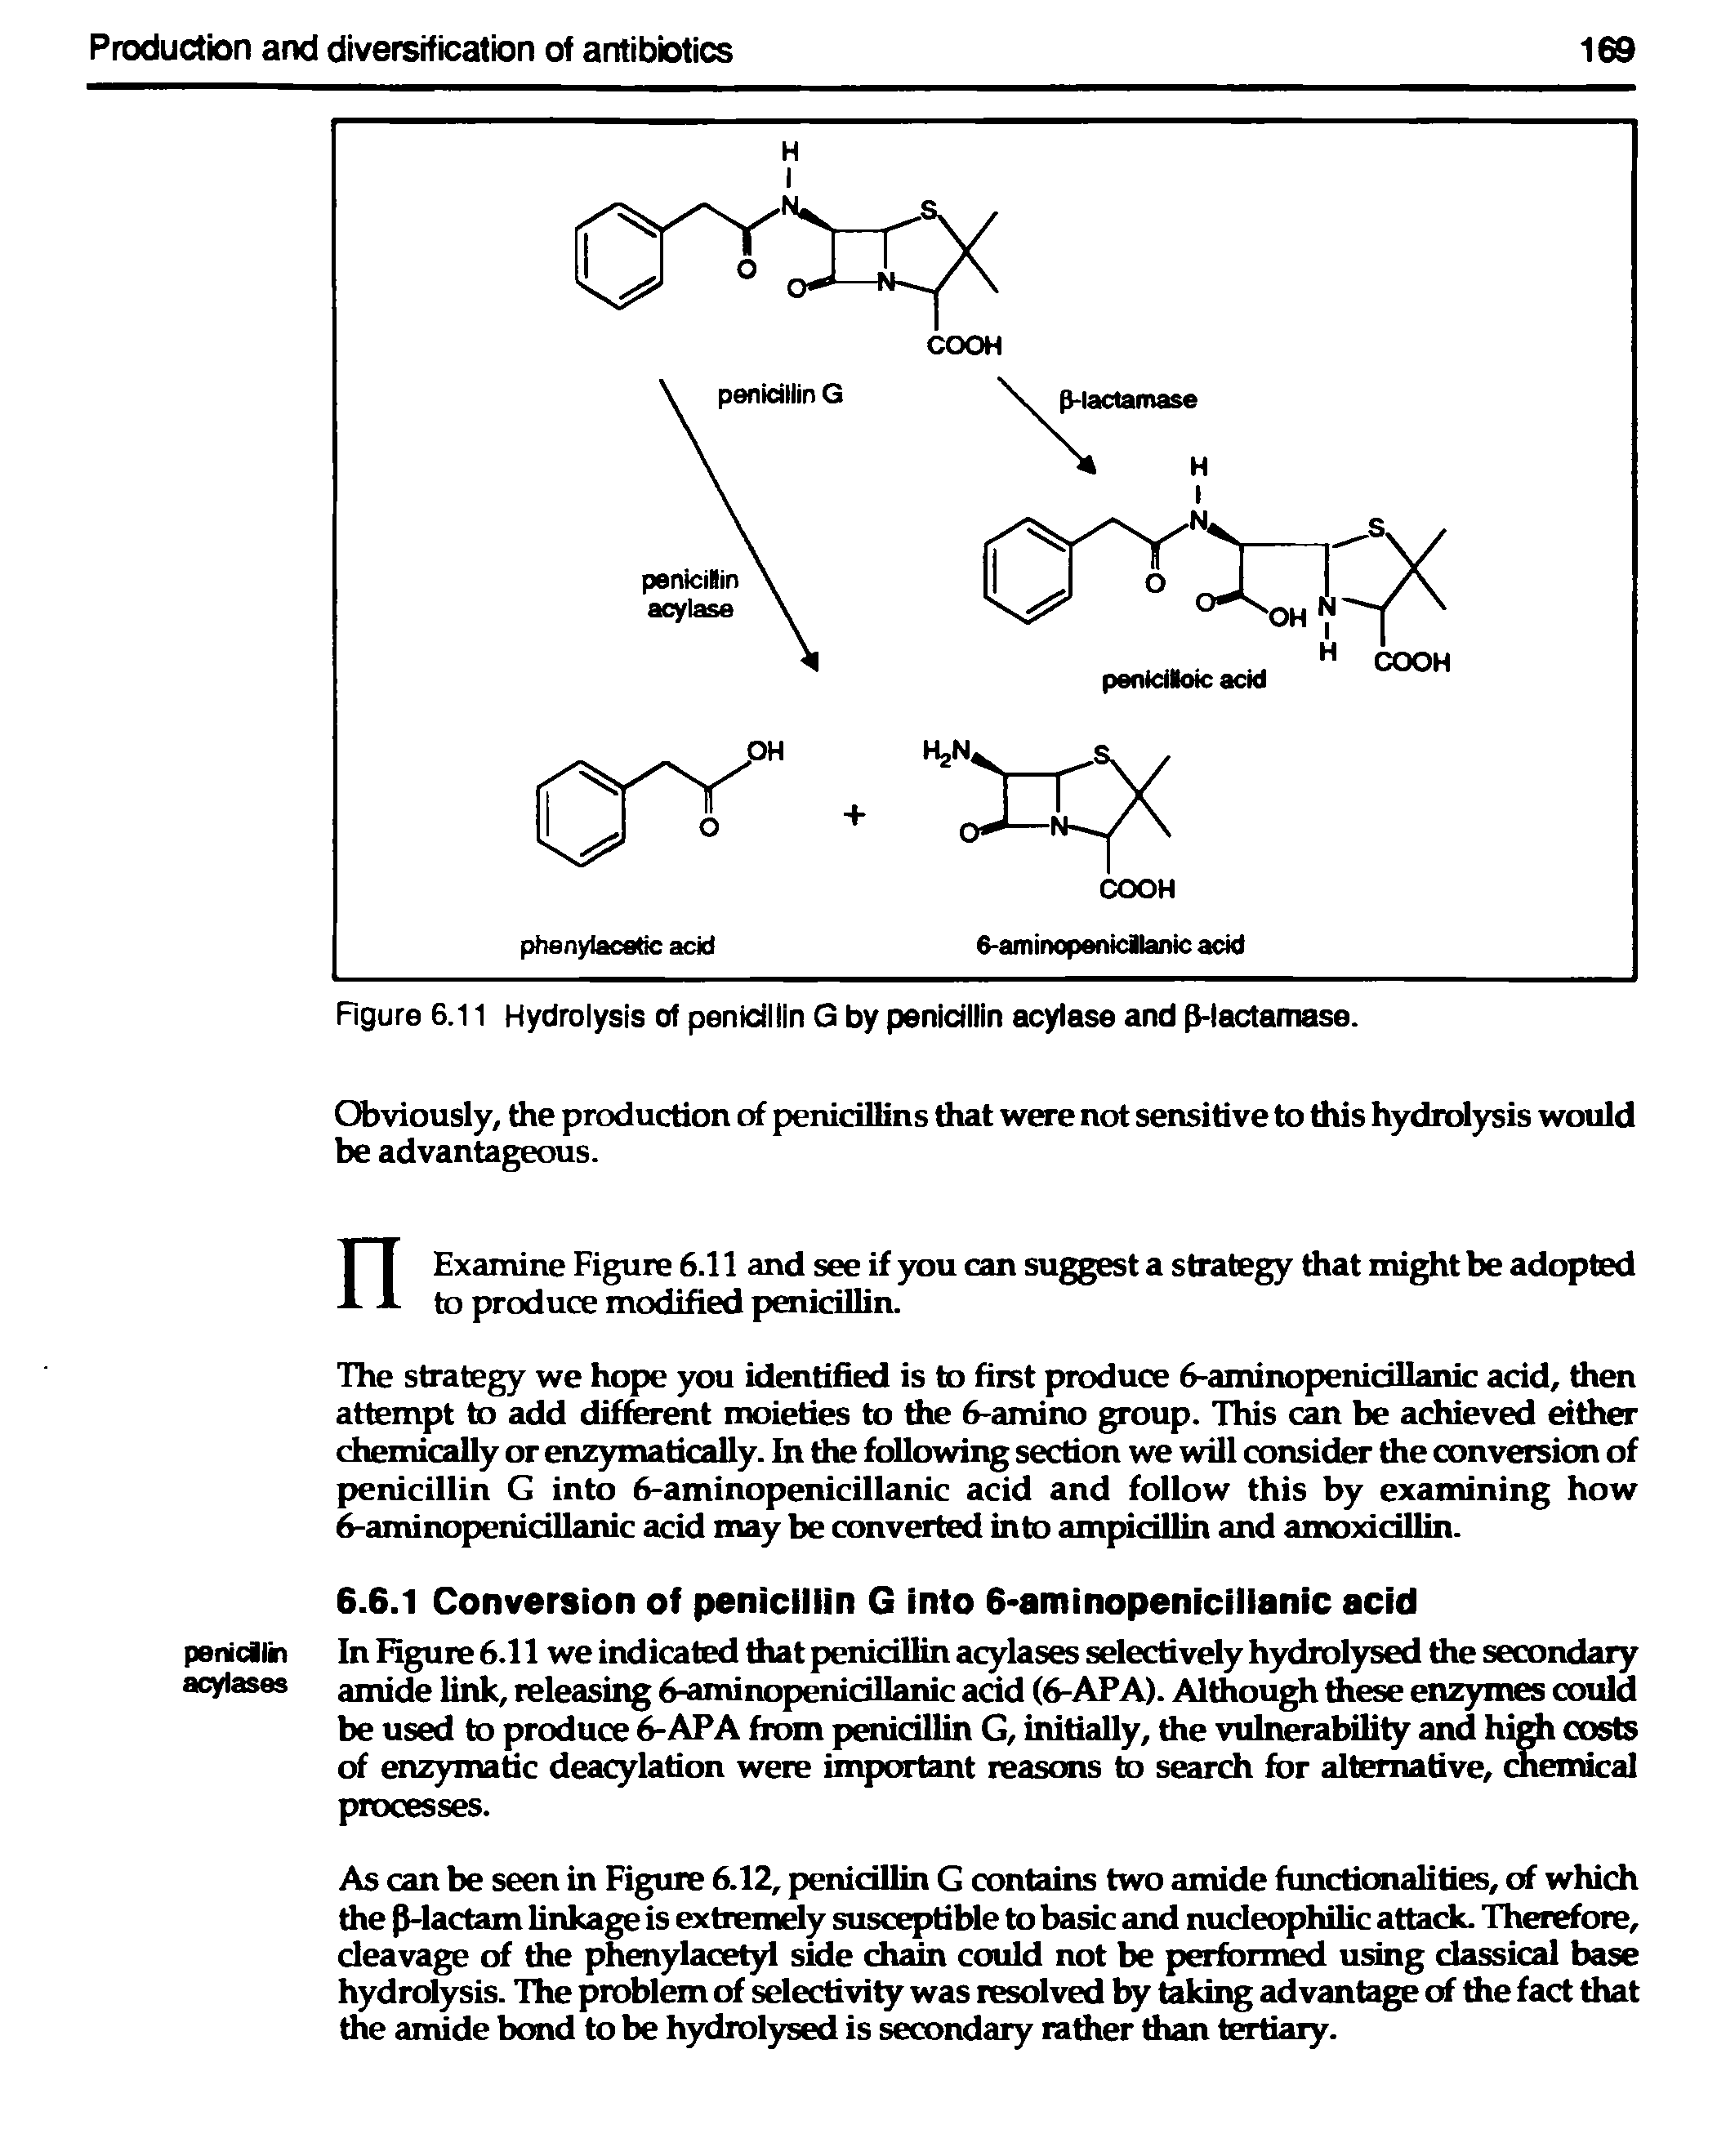 Figure 6.11 Hydrolysis of penicillin G by penicillin acylase and p-lactamase.